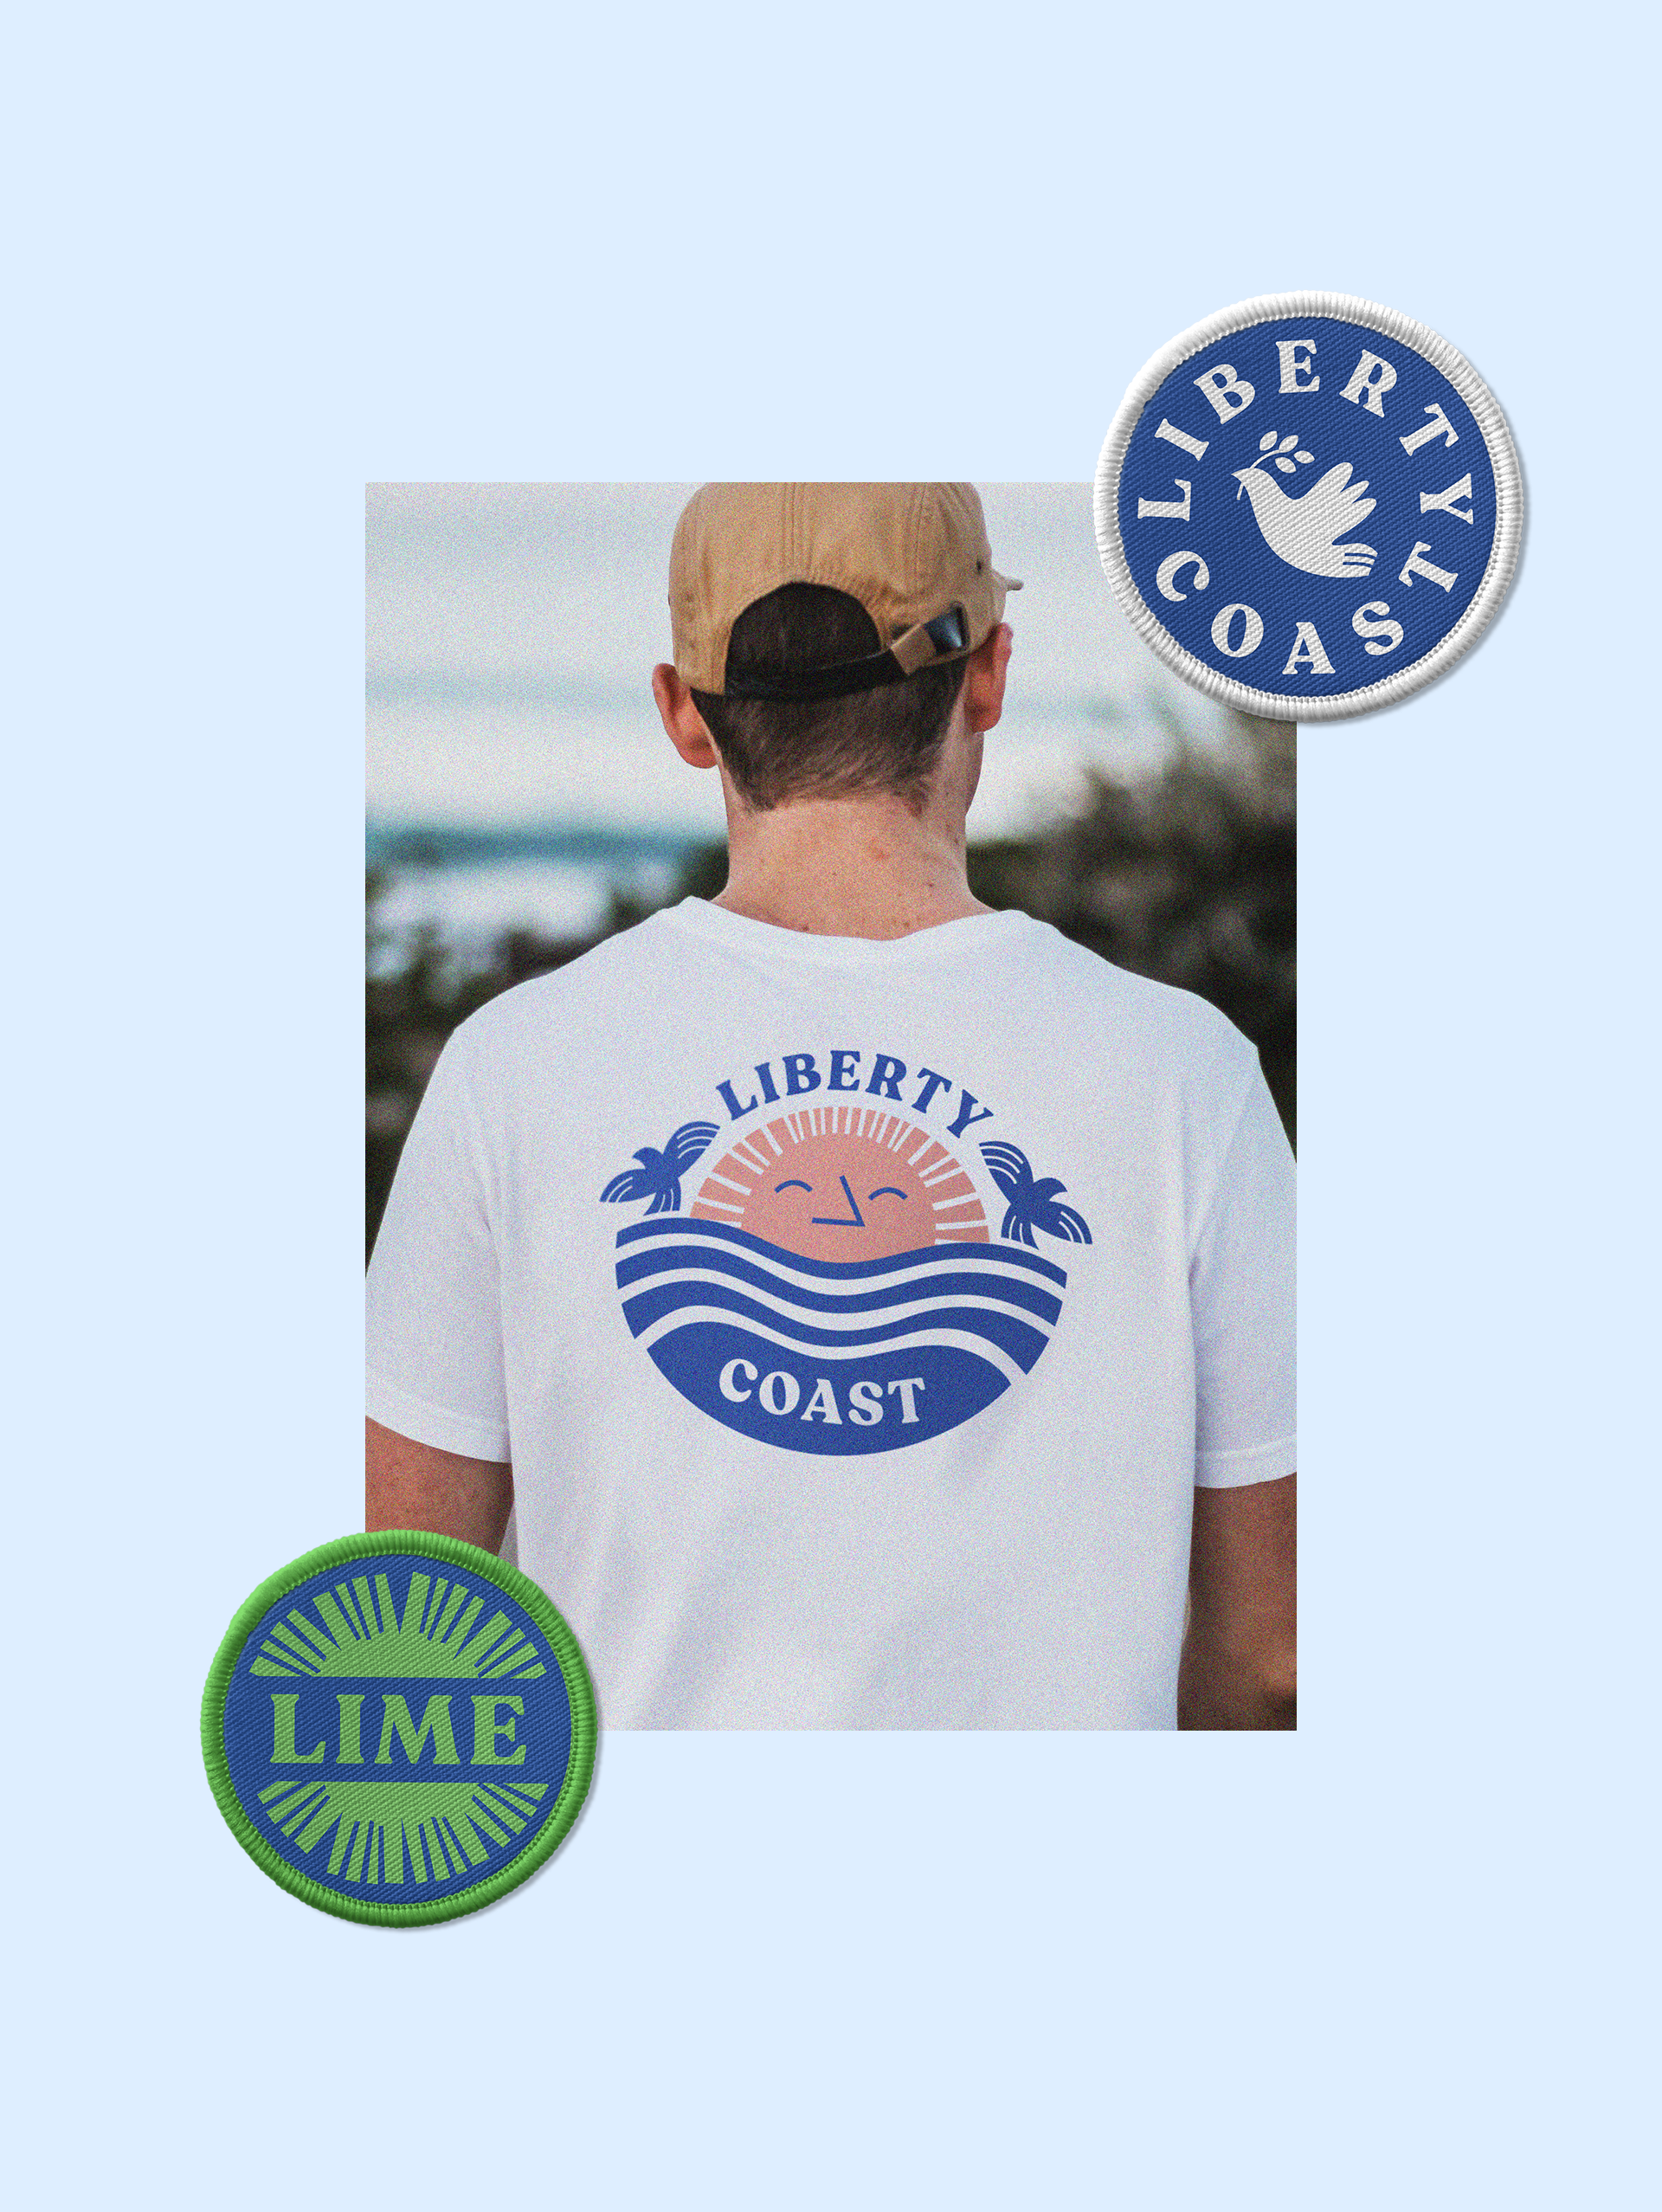 “Liberty Coast” and “Lime” fabric patches on top of a grainy film photography of the back of a Liberty Coast branded t-shirt designed by Our Revolution